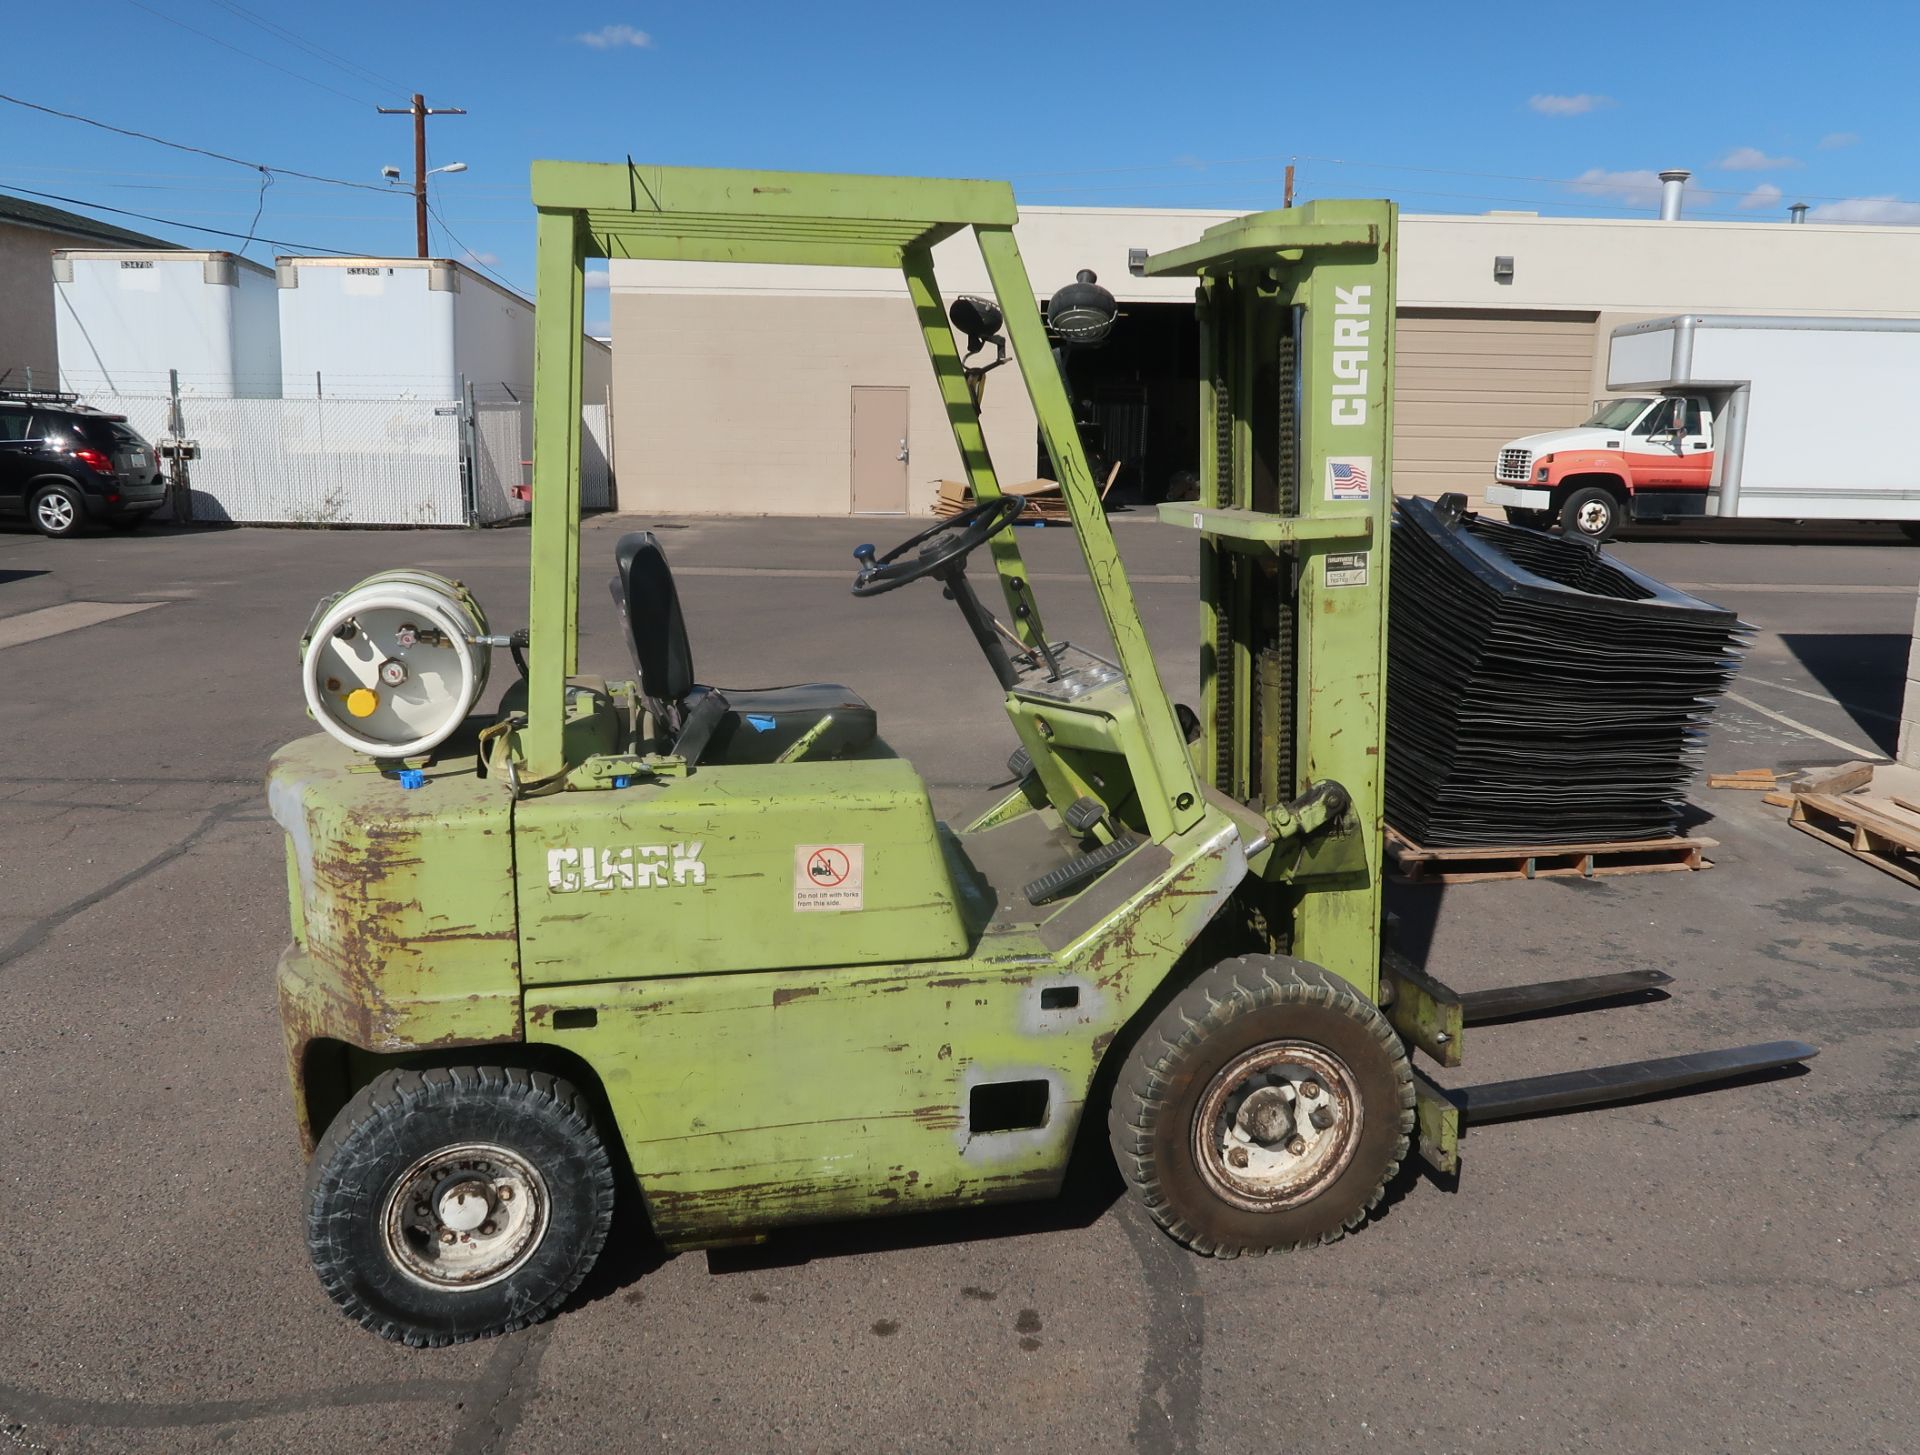 CLARK 4000# PROPANE FORKLIFT, MDL. C500-Y40, SN. 4355-85-3966, PNEUMATIC TIRE, 2-STAGE LIFT. - Image 2 of 6